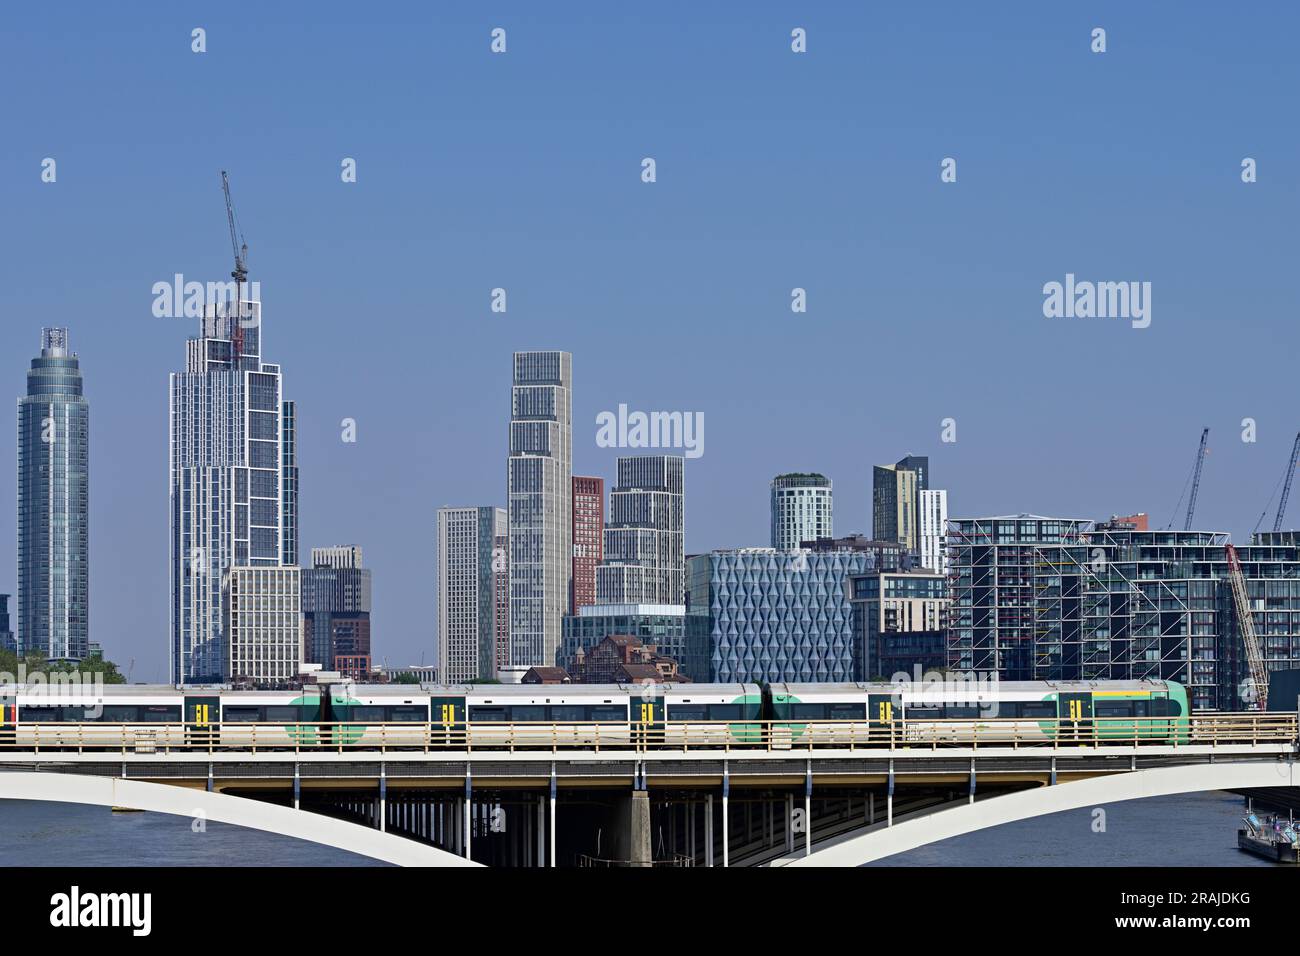 Grosvenor Railway Bridge in front of Nine Elms district and the US Embassy, South East London, United Kingdom Stock Photo